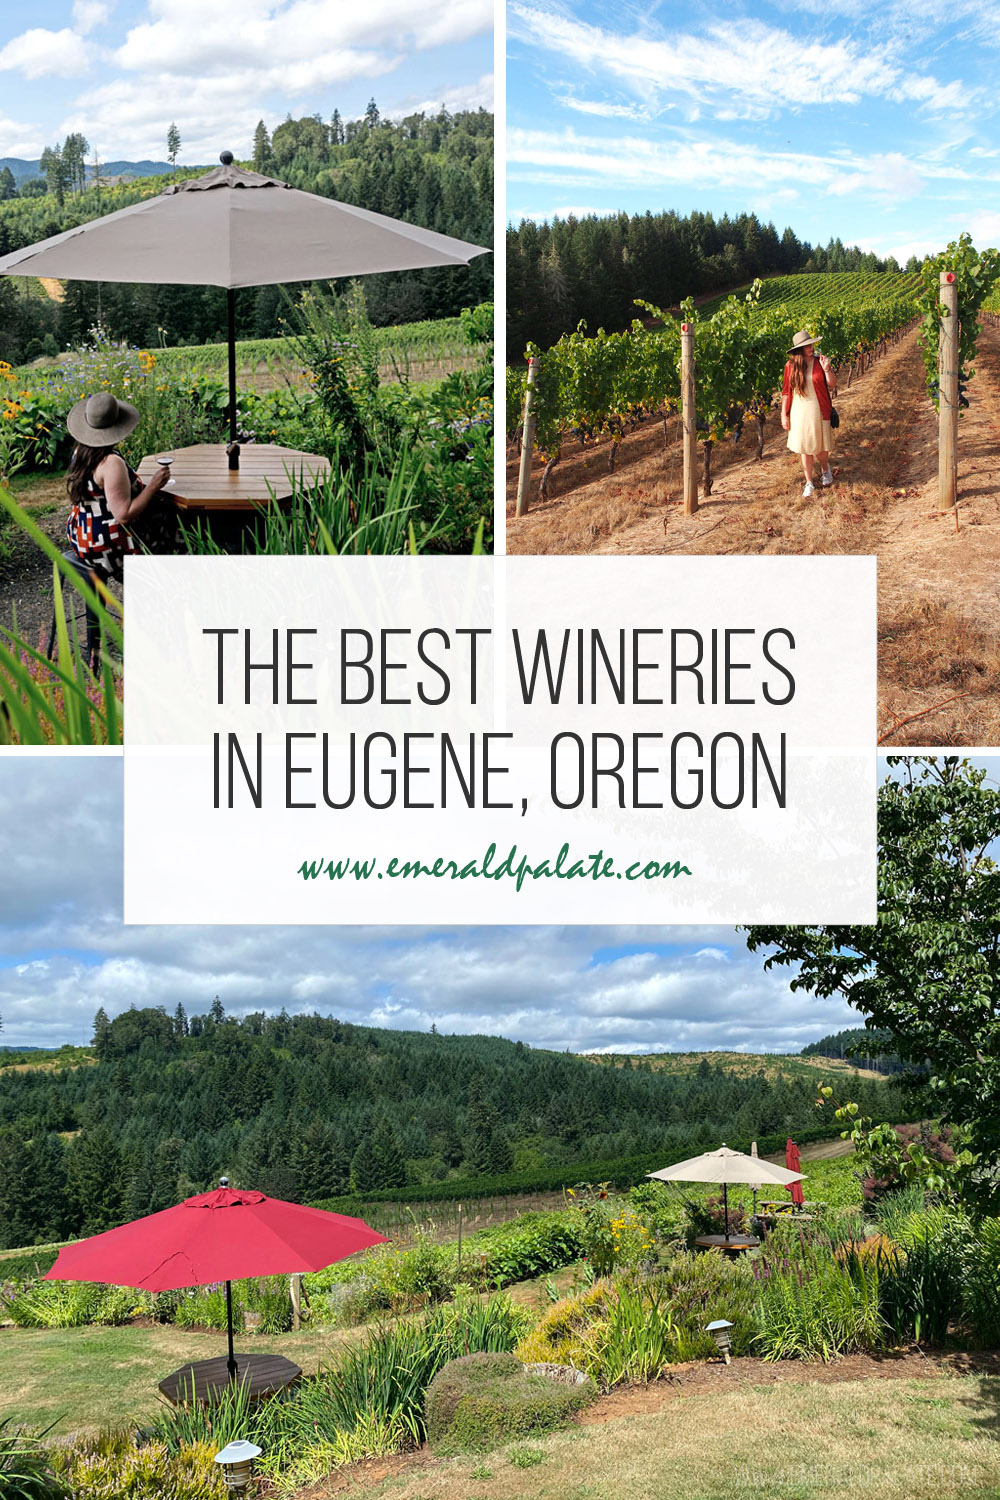 Eugene, OR wineries are the hidden gem of the South Willamette Valley. Most people only go to the Willamette Valley wineries near Portland, but those in the know visit the more casual, less expensive vineyards and tasting rooms in Eugene and the surrounding area.